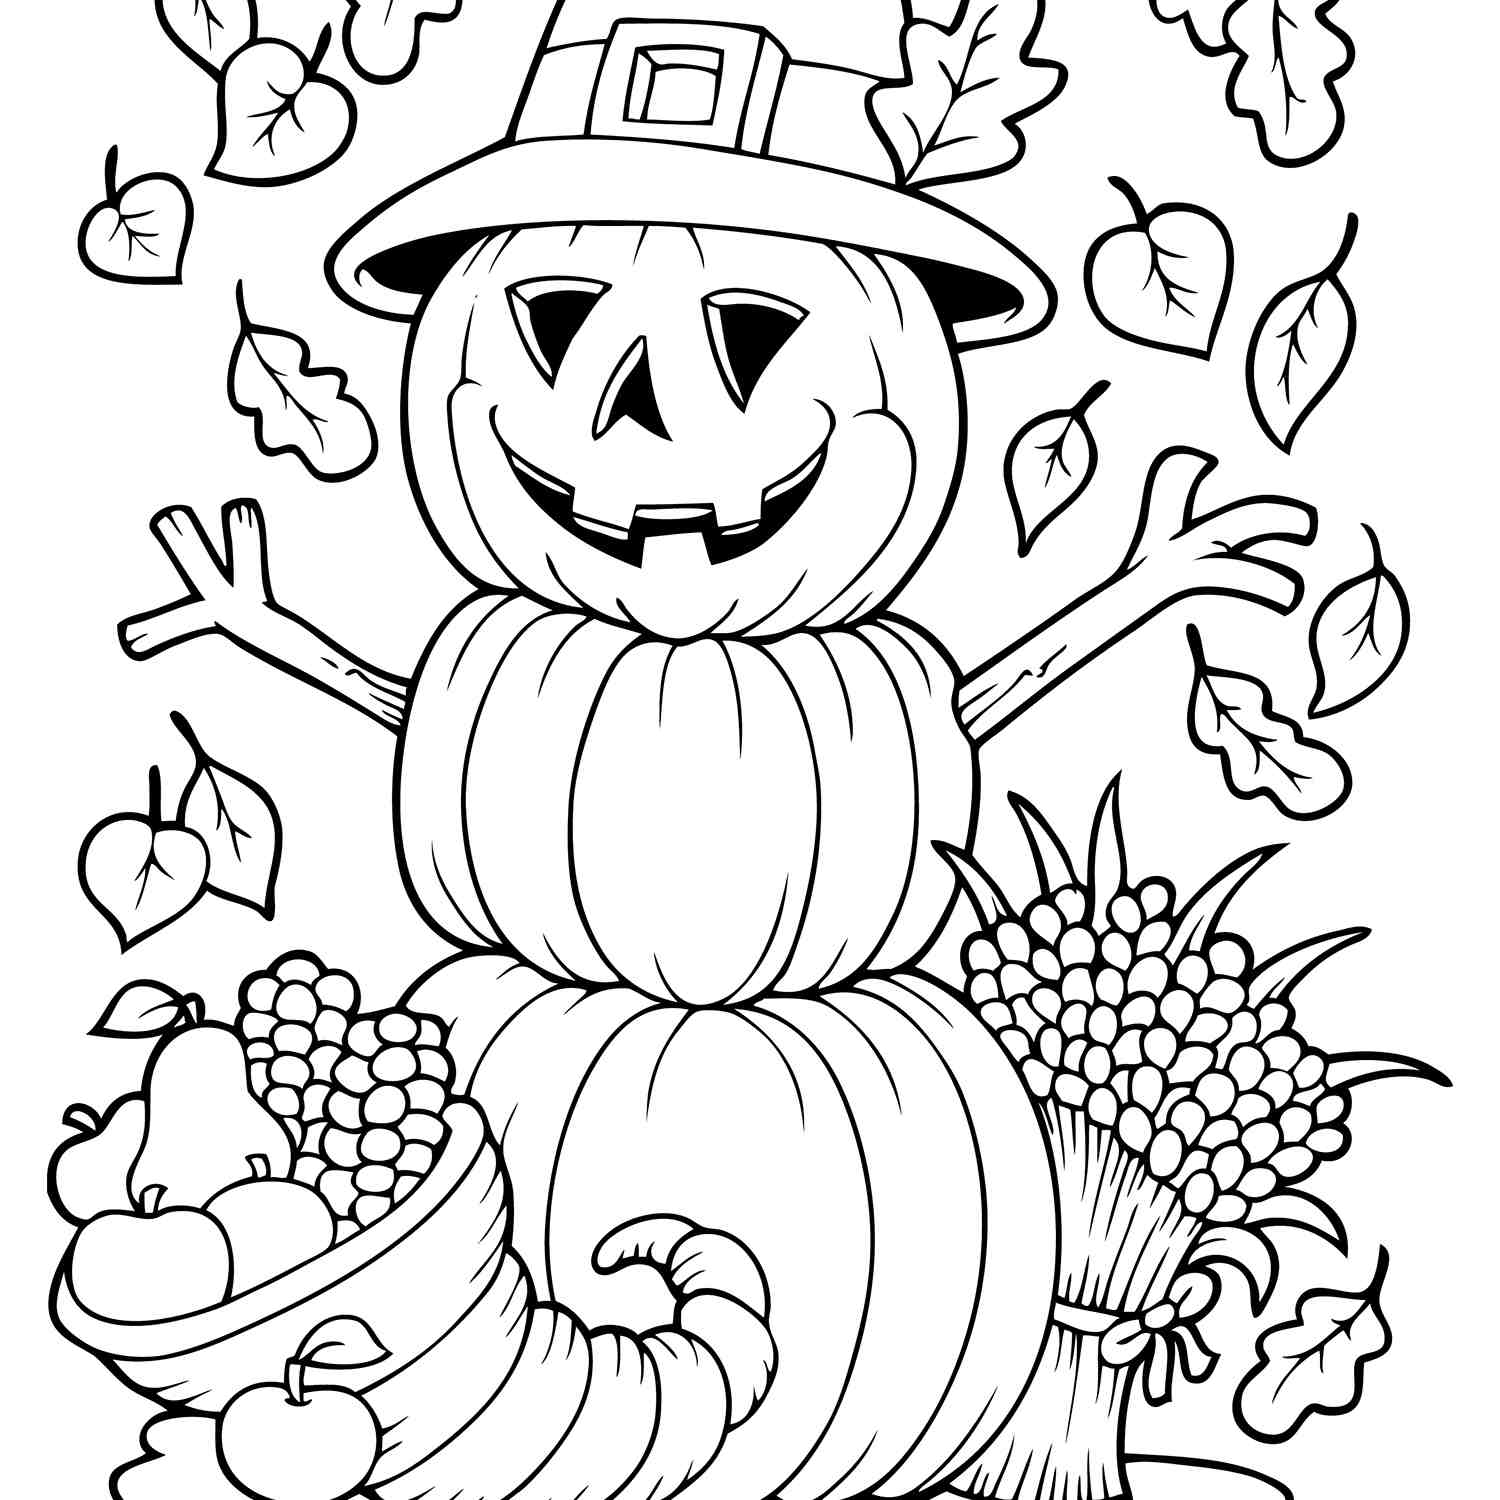 Coloring Pages Autumn Season Coloring Awesome Free Fall Coloring Sheets Image Inspirations